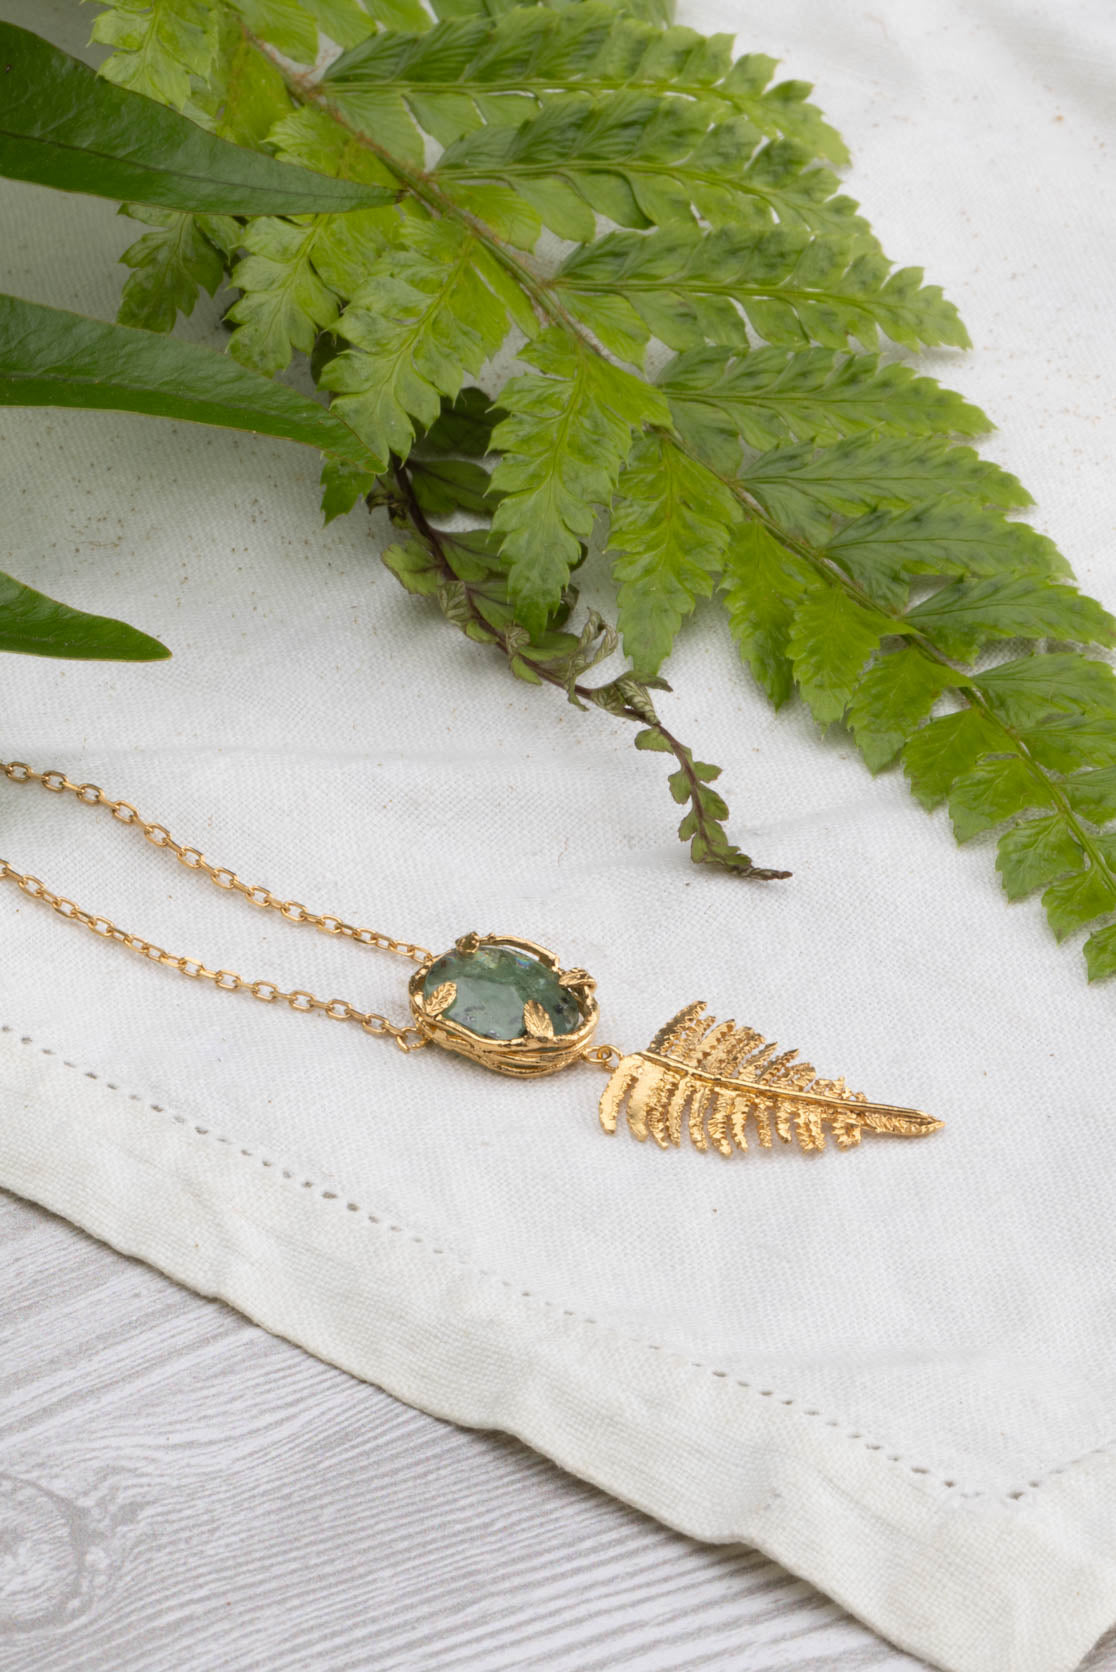 Botanical Nest Necklace With Fern Drop and labradorite, kyanite or ruby gemstone